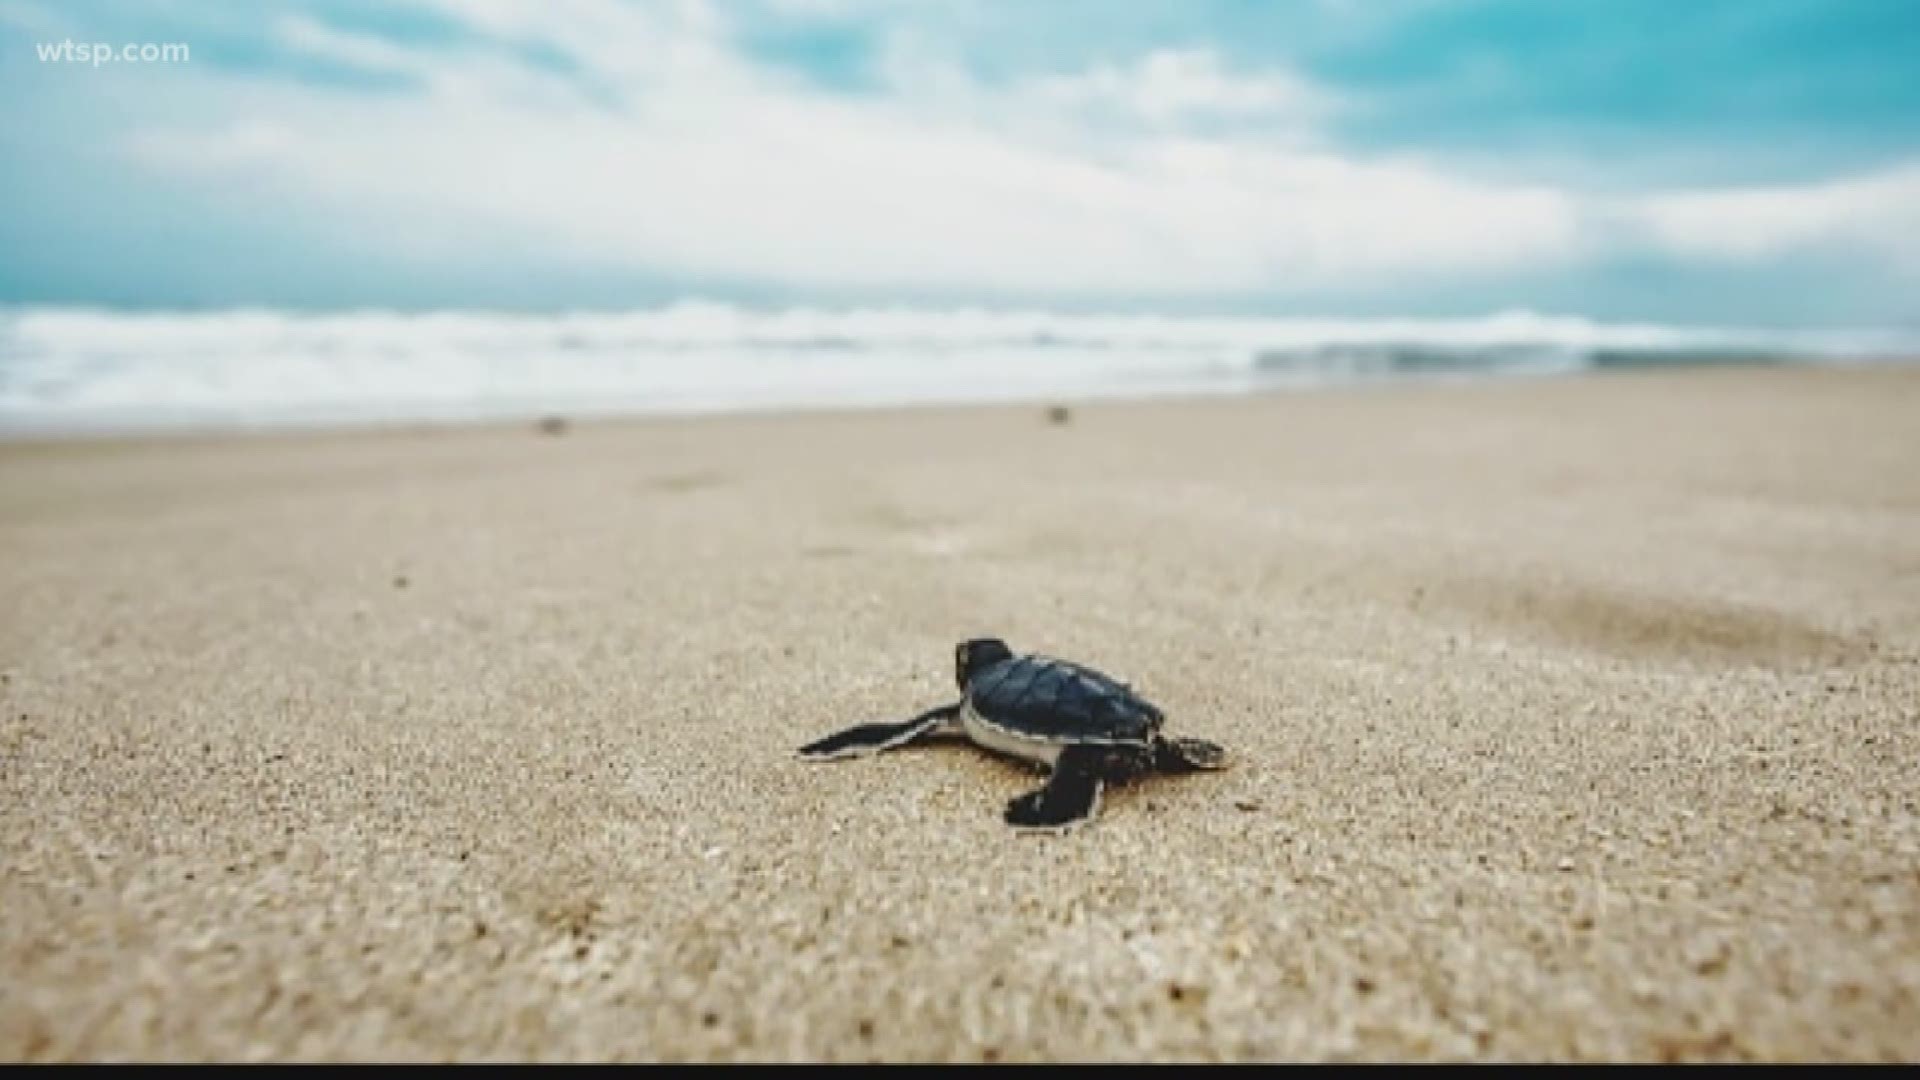 Independence Day fireworks on the beach coincide with sea turtle nesting season. Here's how to make sure you don't disturb nesting turtles and hatchlings.